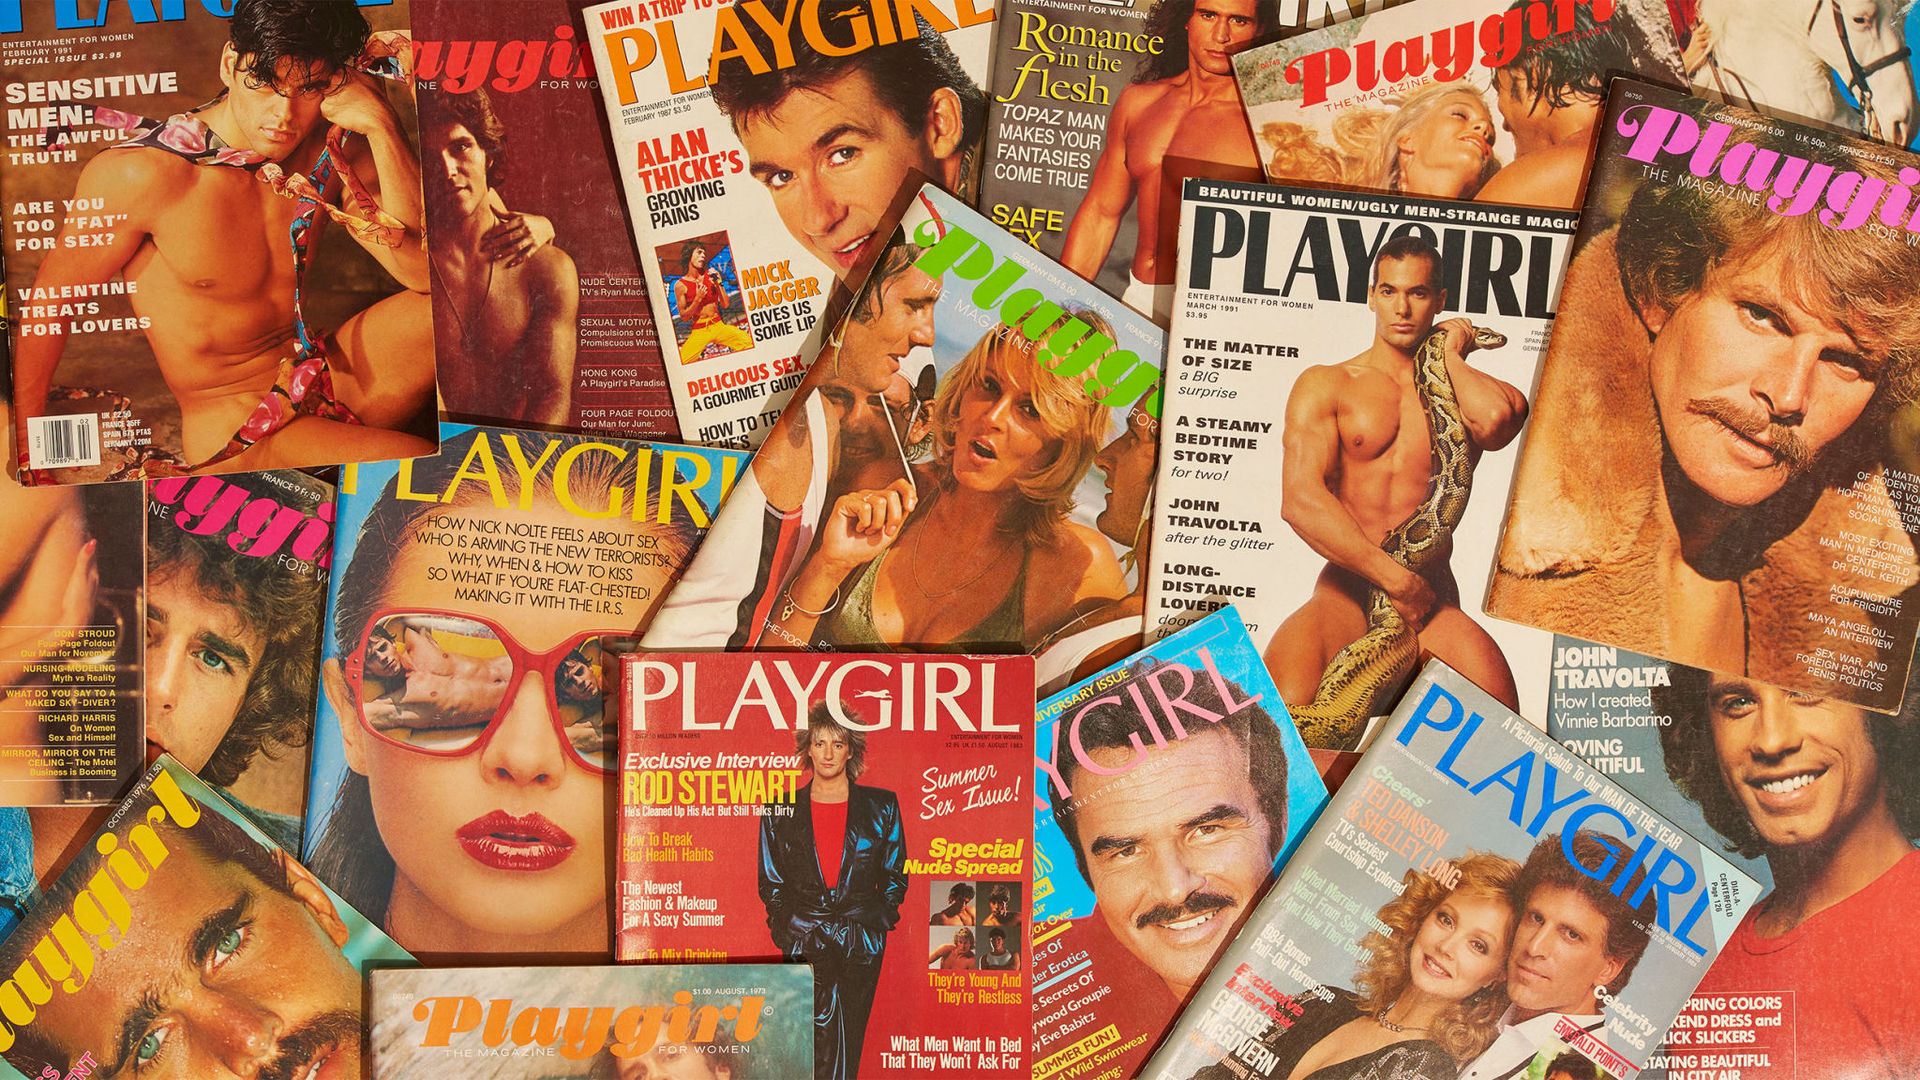 Forced Monster Cock Too Big - History of Playgirl Magazine - How Playgirl Normalized Male Nudity